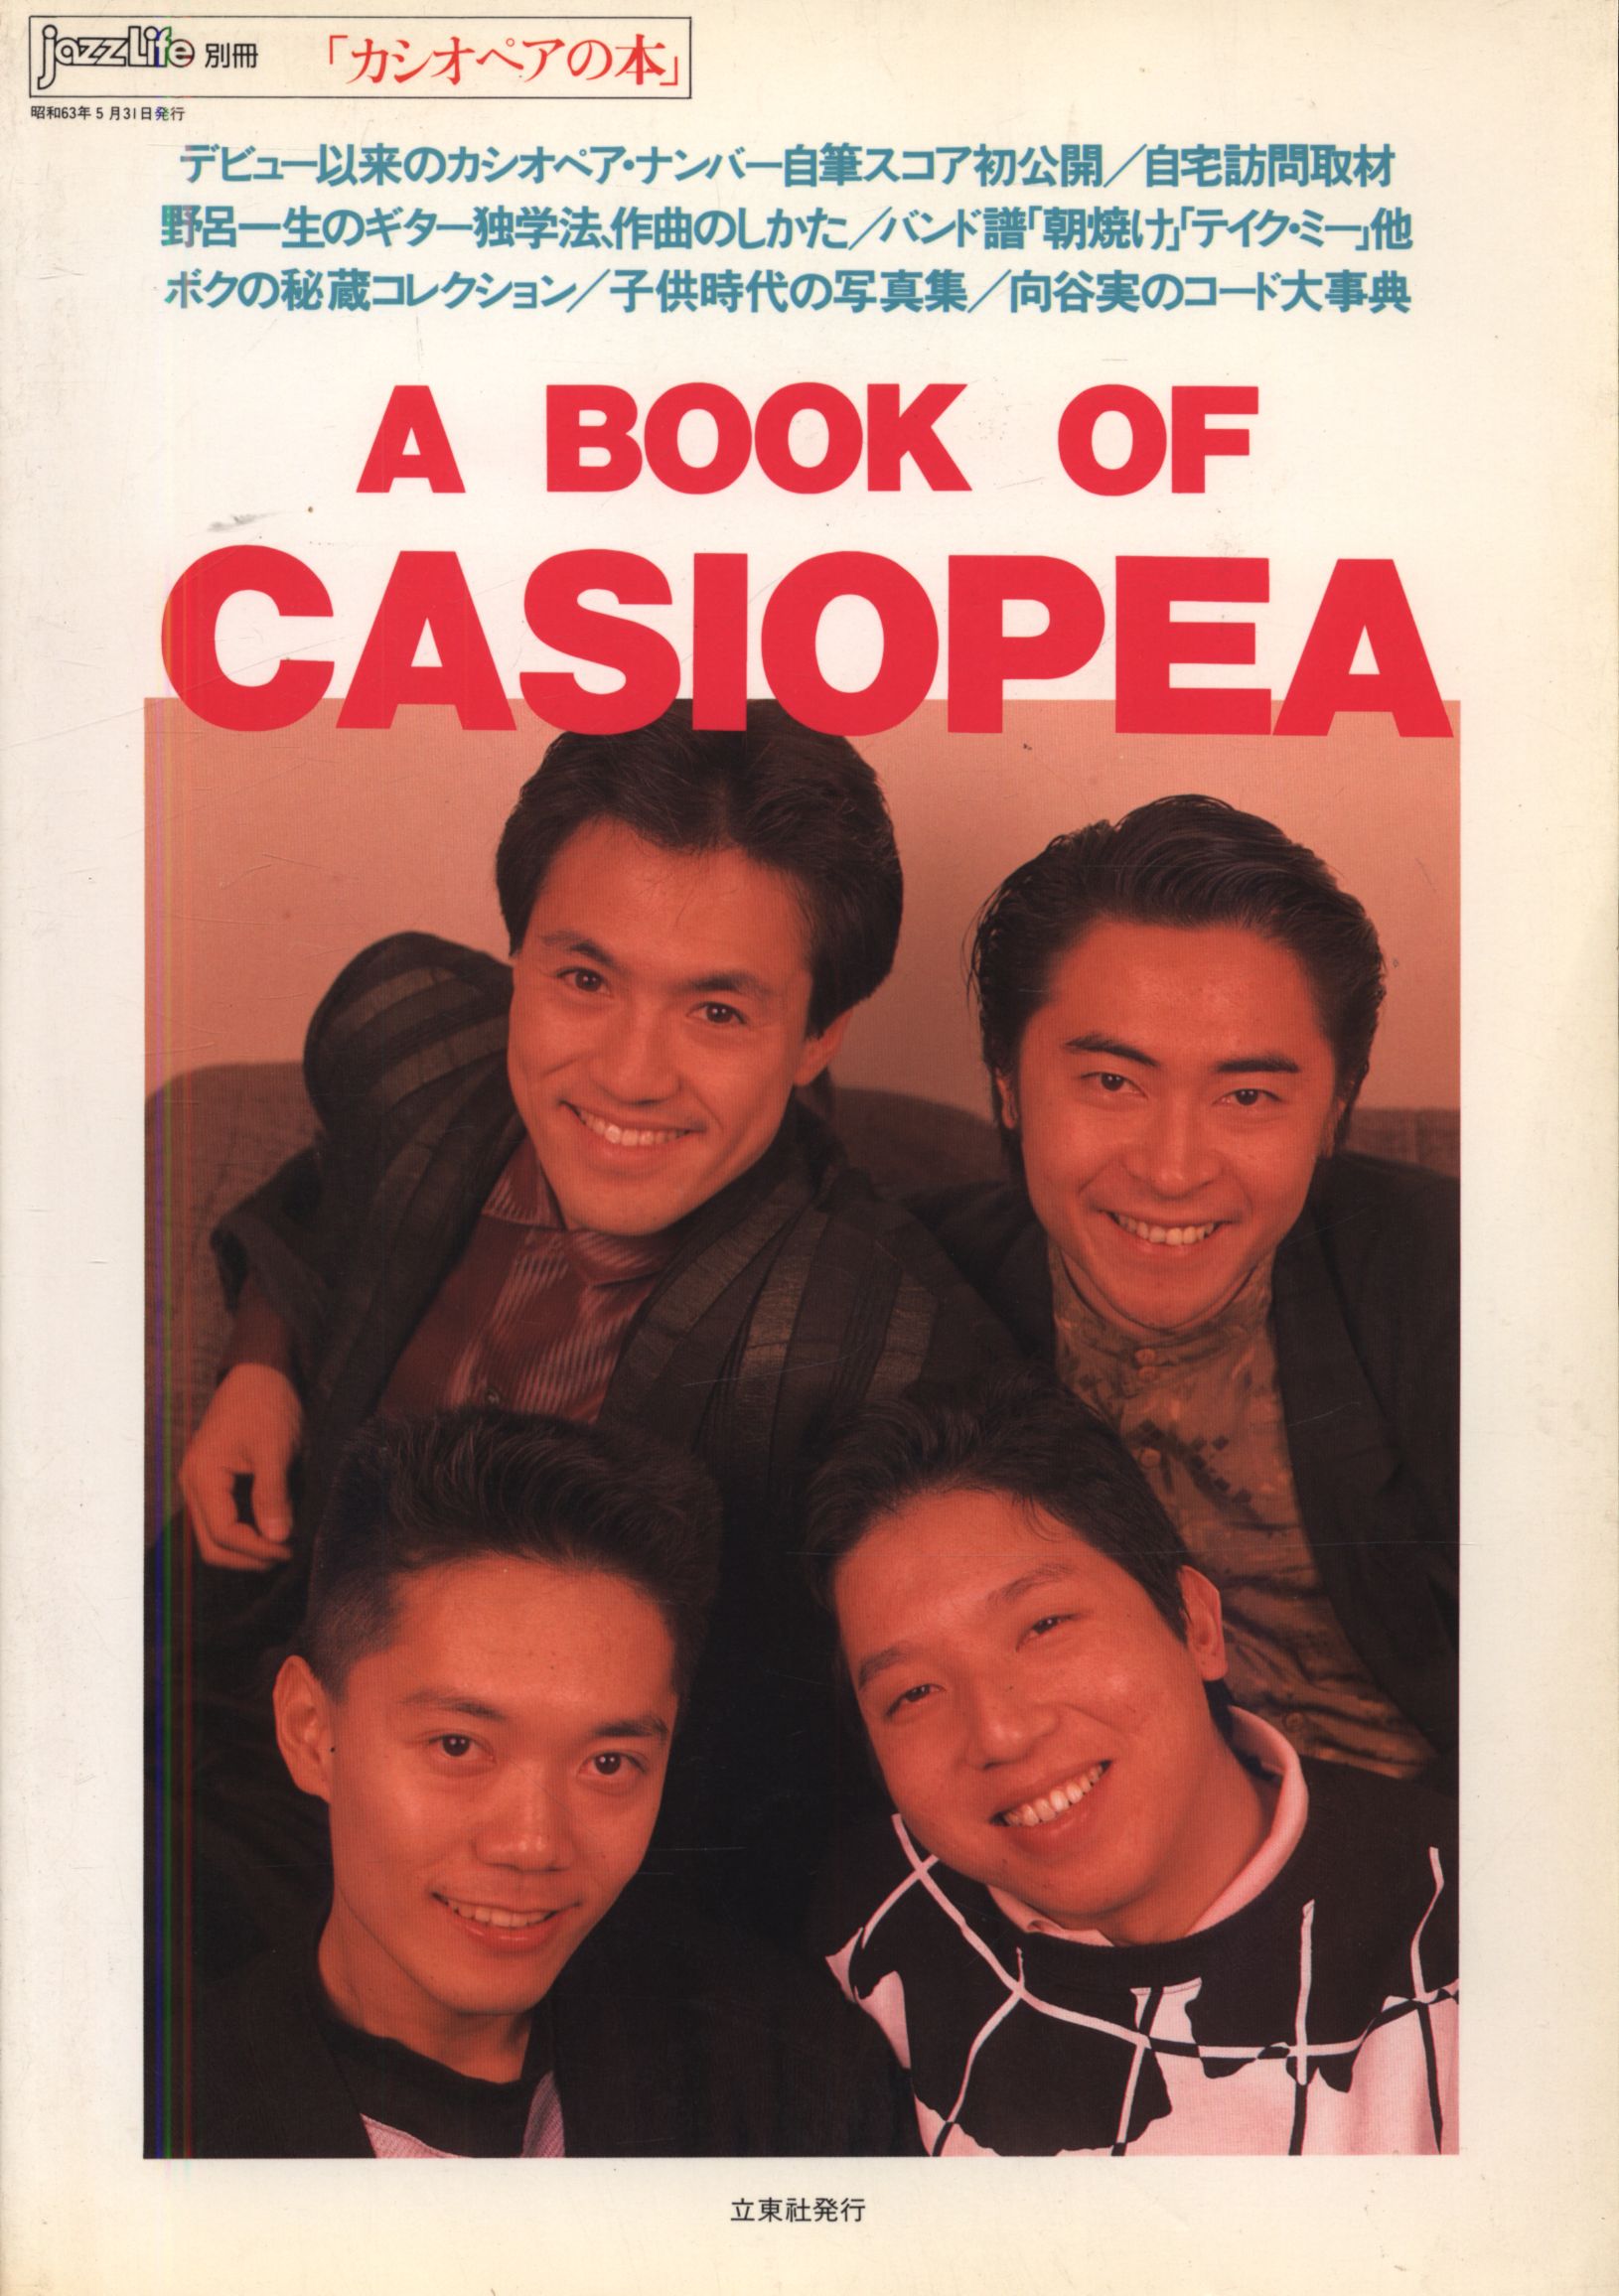 jazz Life Separate Volume A BOOK OF CASIOPEA 